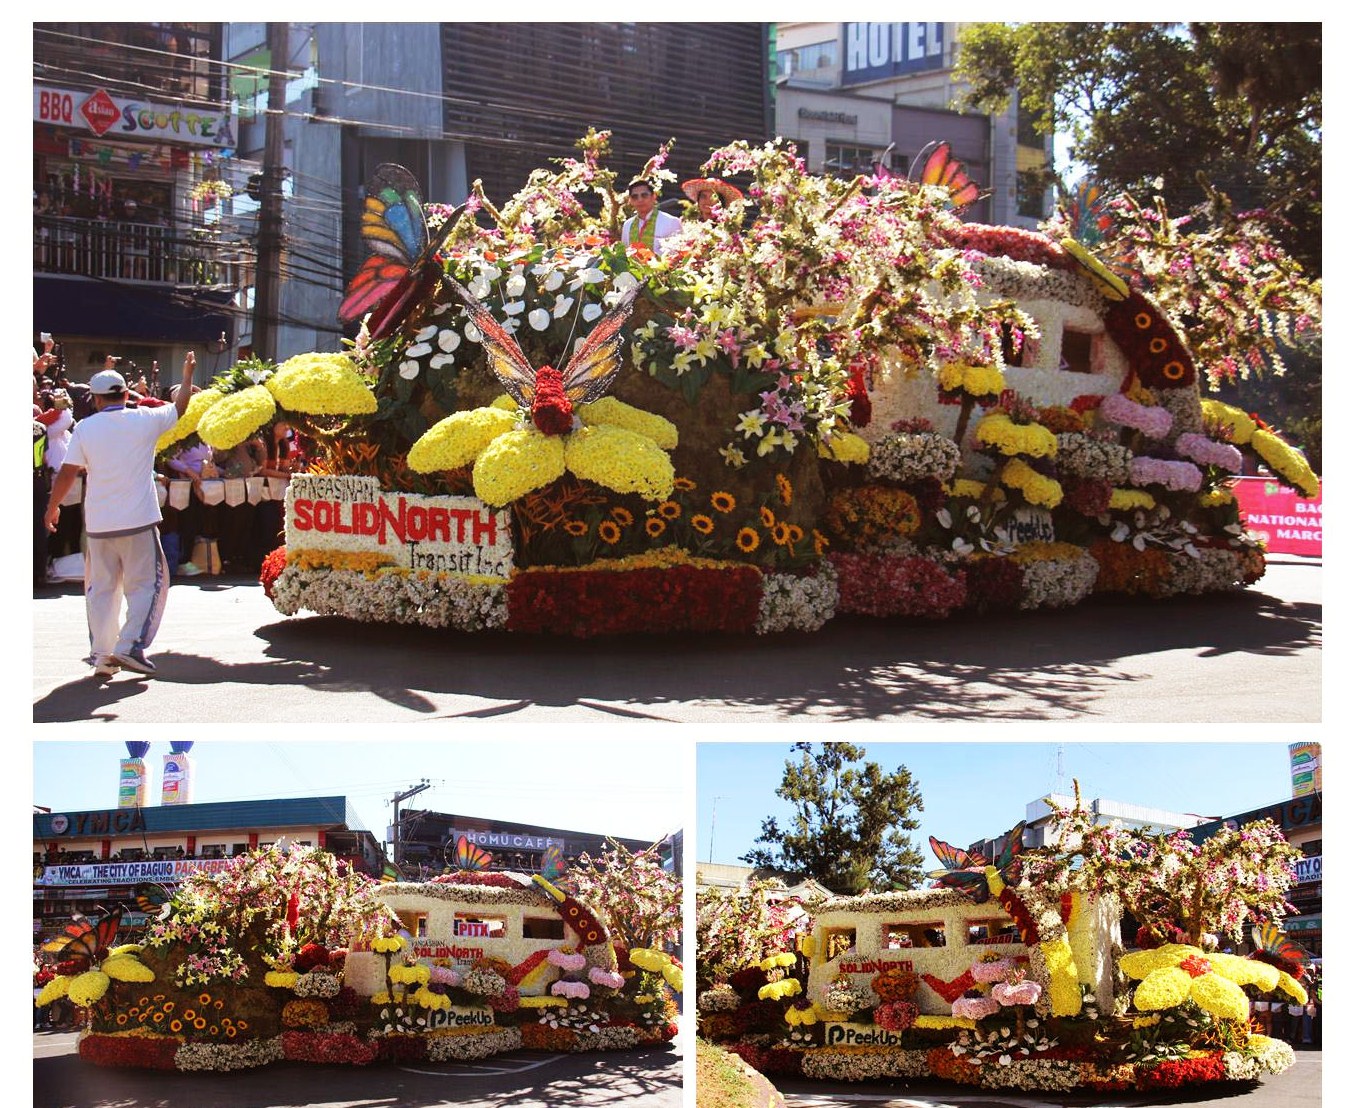 Pangasinan Solid North took first place in the floral float parade